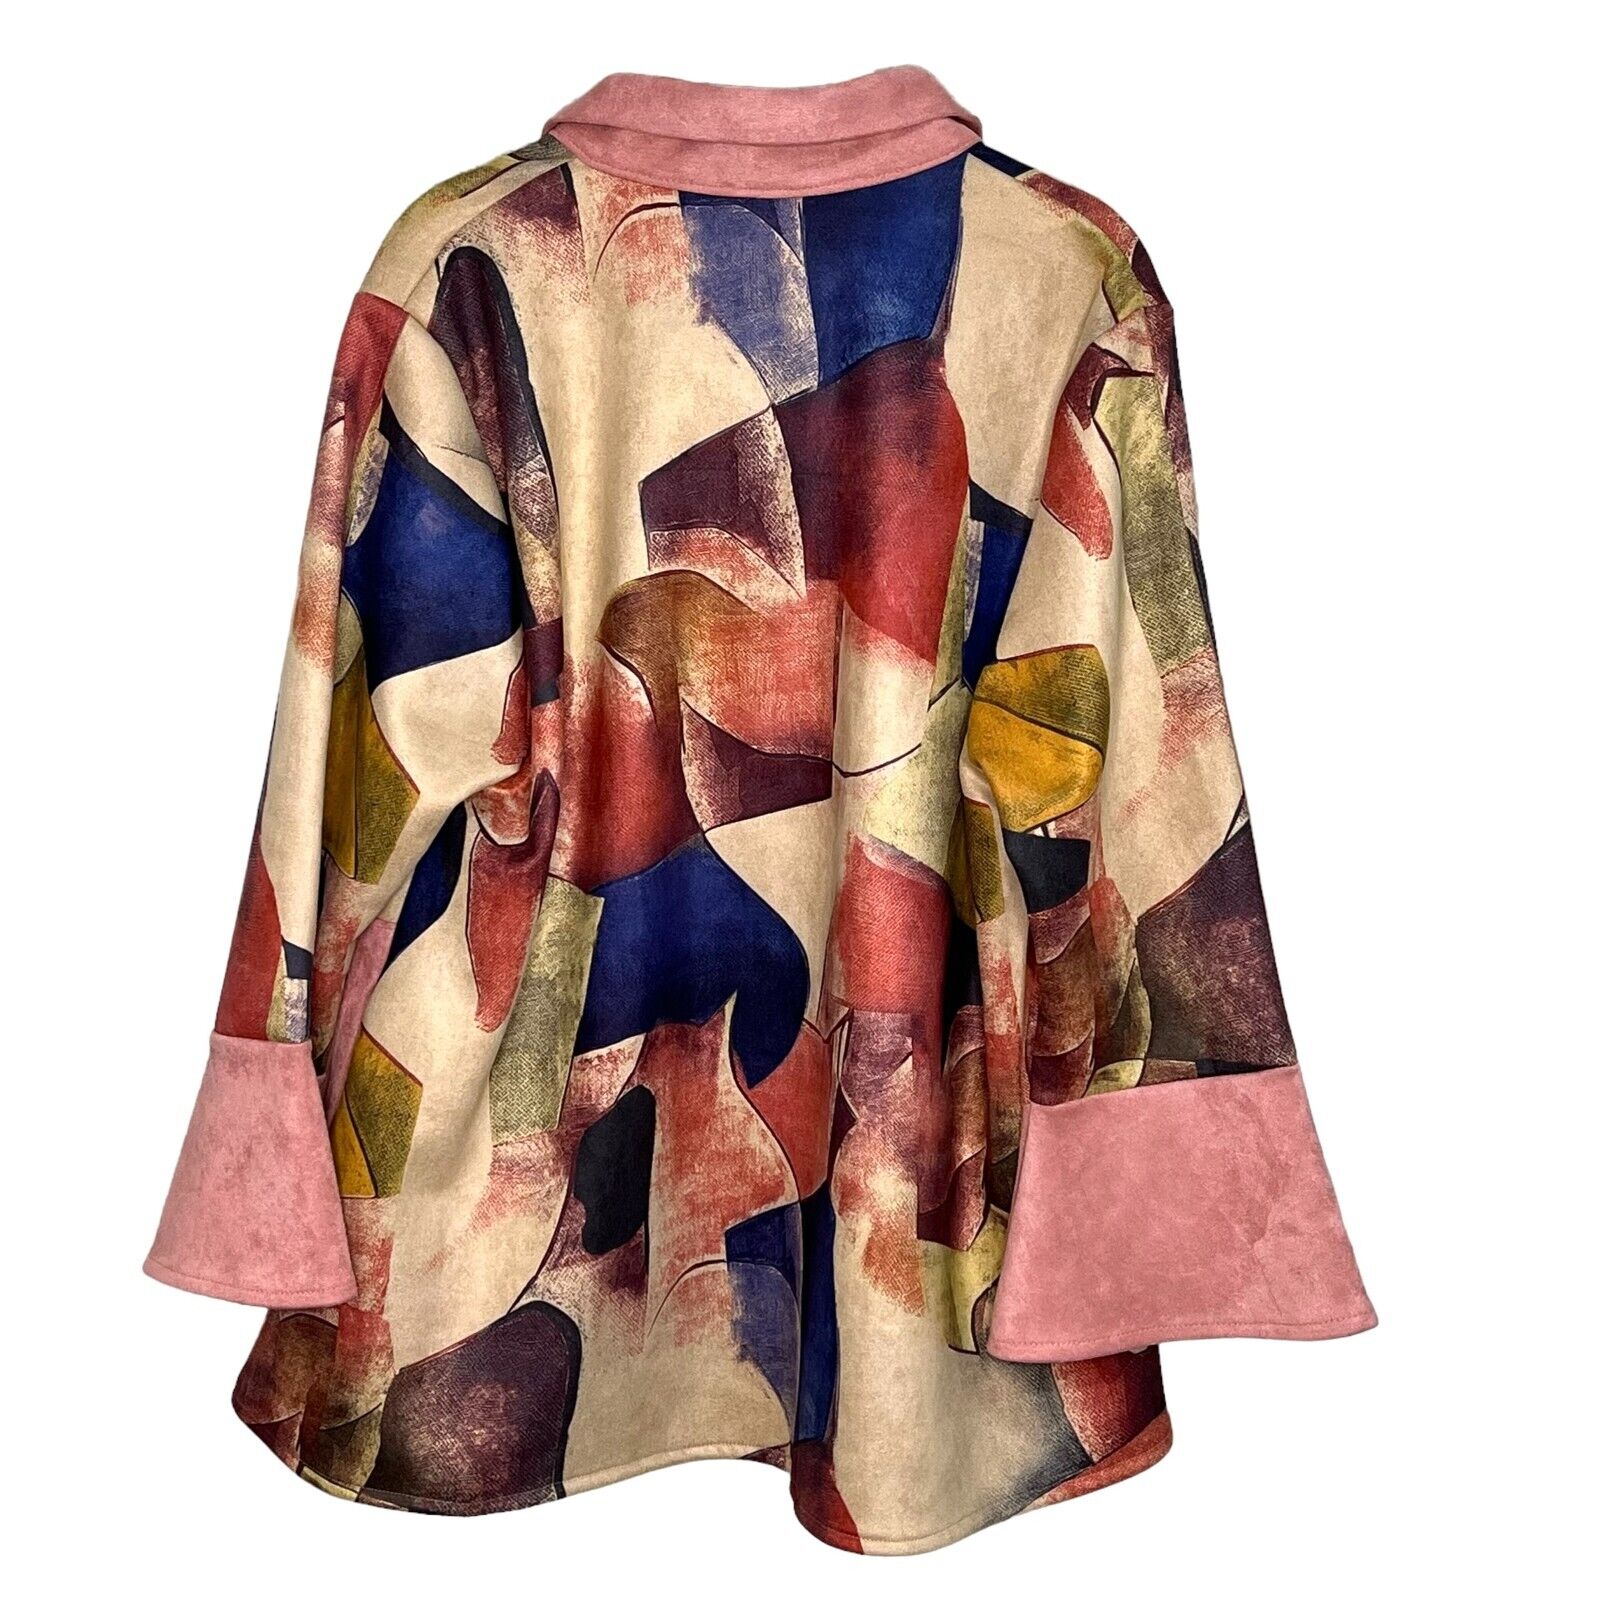 DAMEE Inc Pink Abstract Art to Wear Collared Swing Jacket Top Size XL